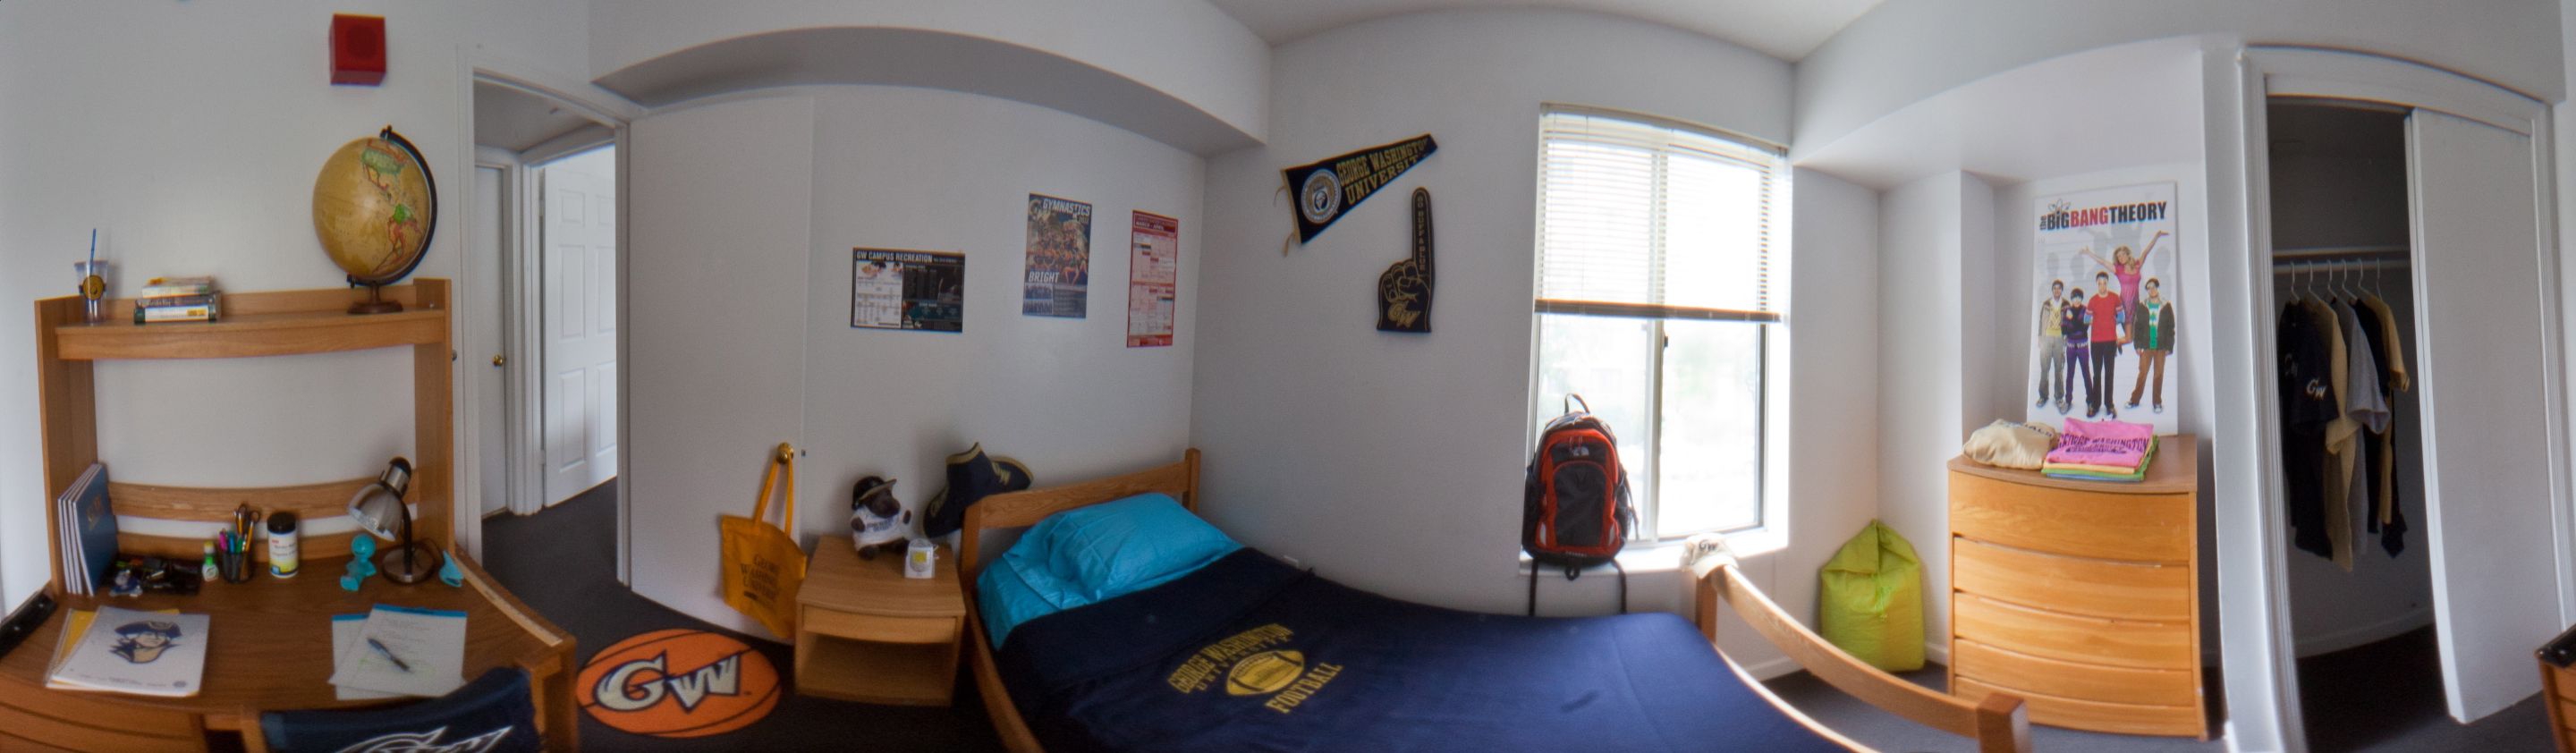 A panoramic view of a single residence hall room.